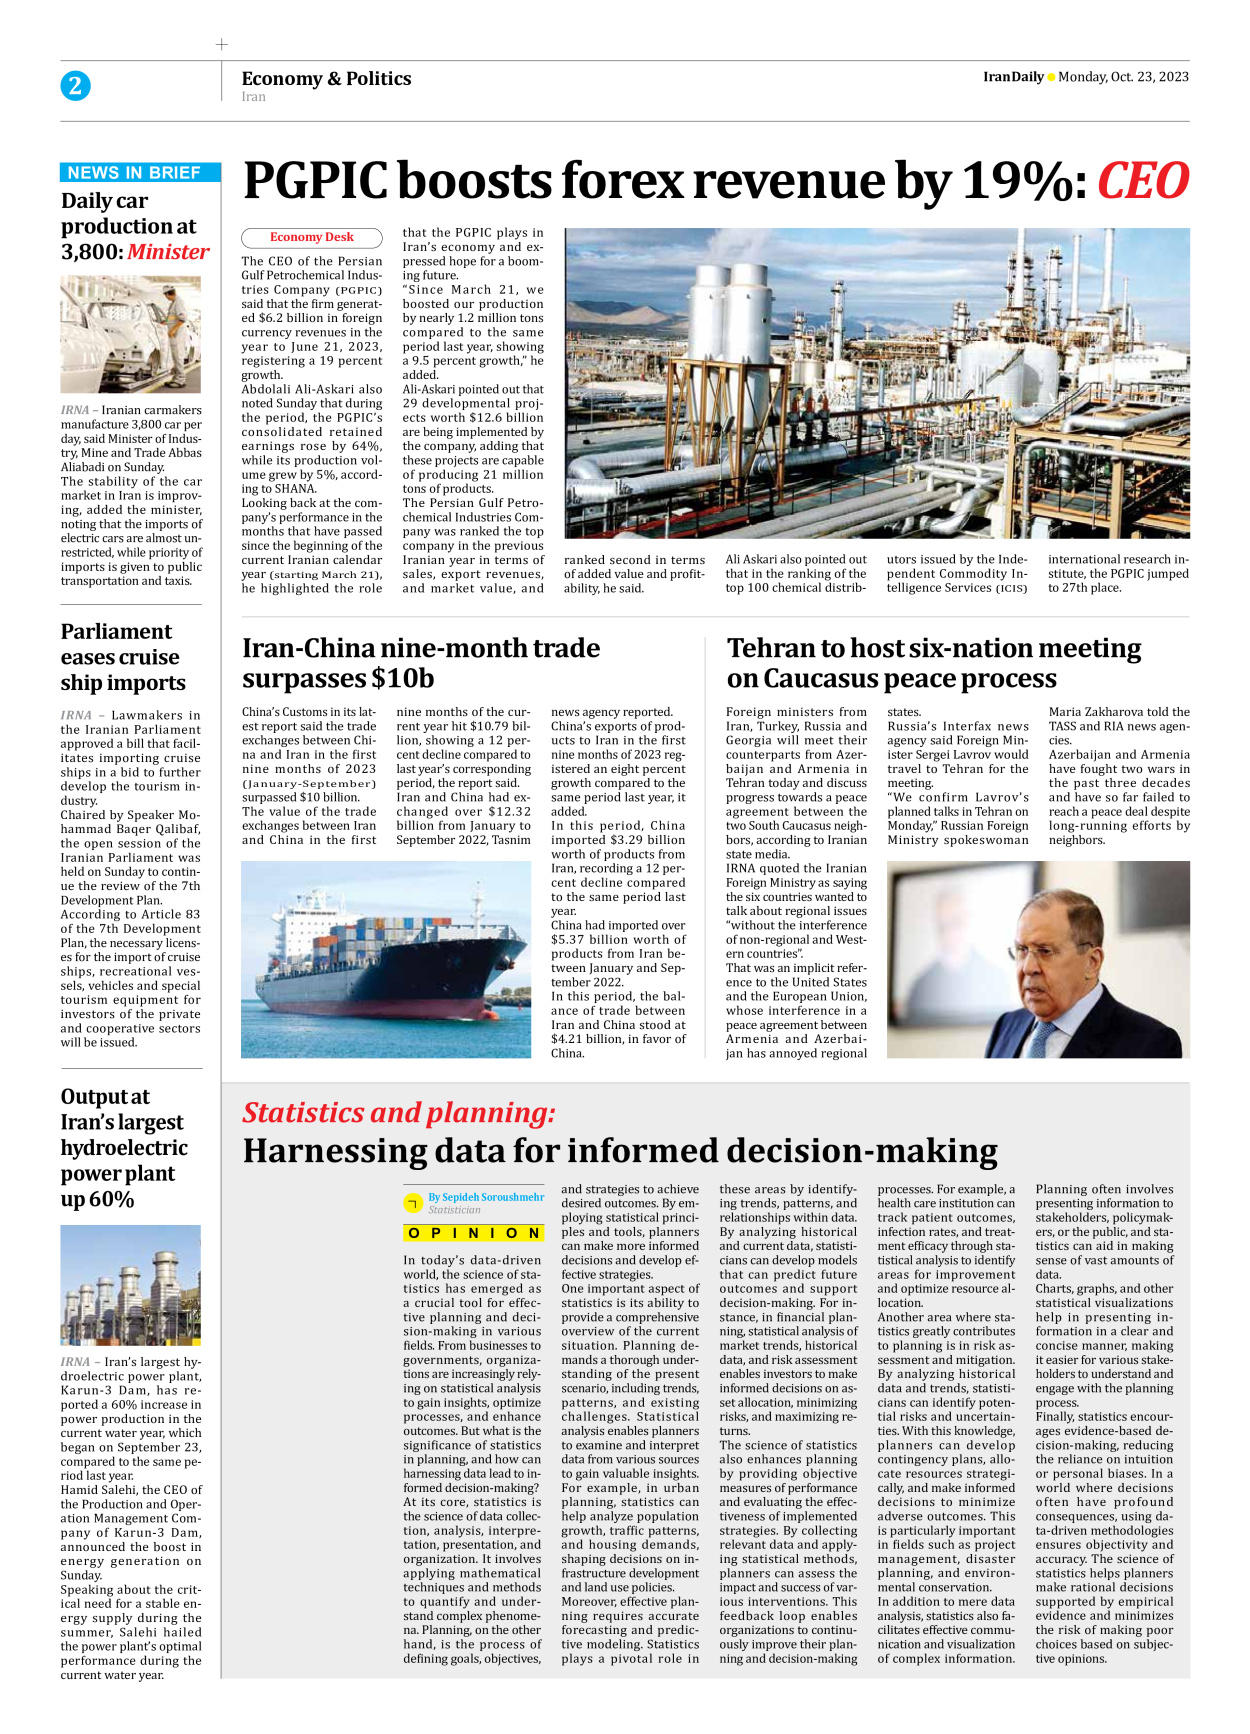 Iran Daily - Number Seven Thousand Four Hundred and Fifteen - 23 October 2023 - Page 2